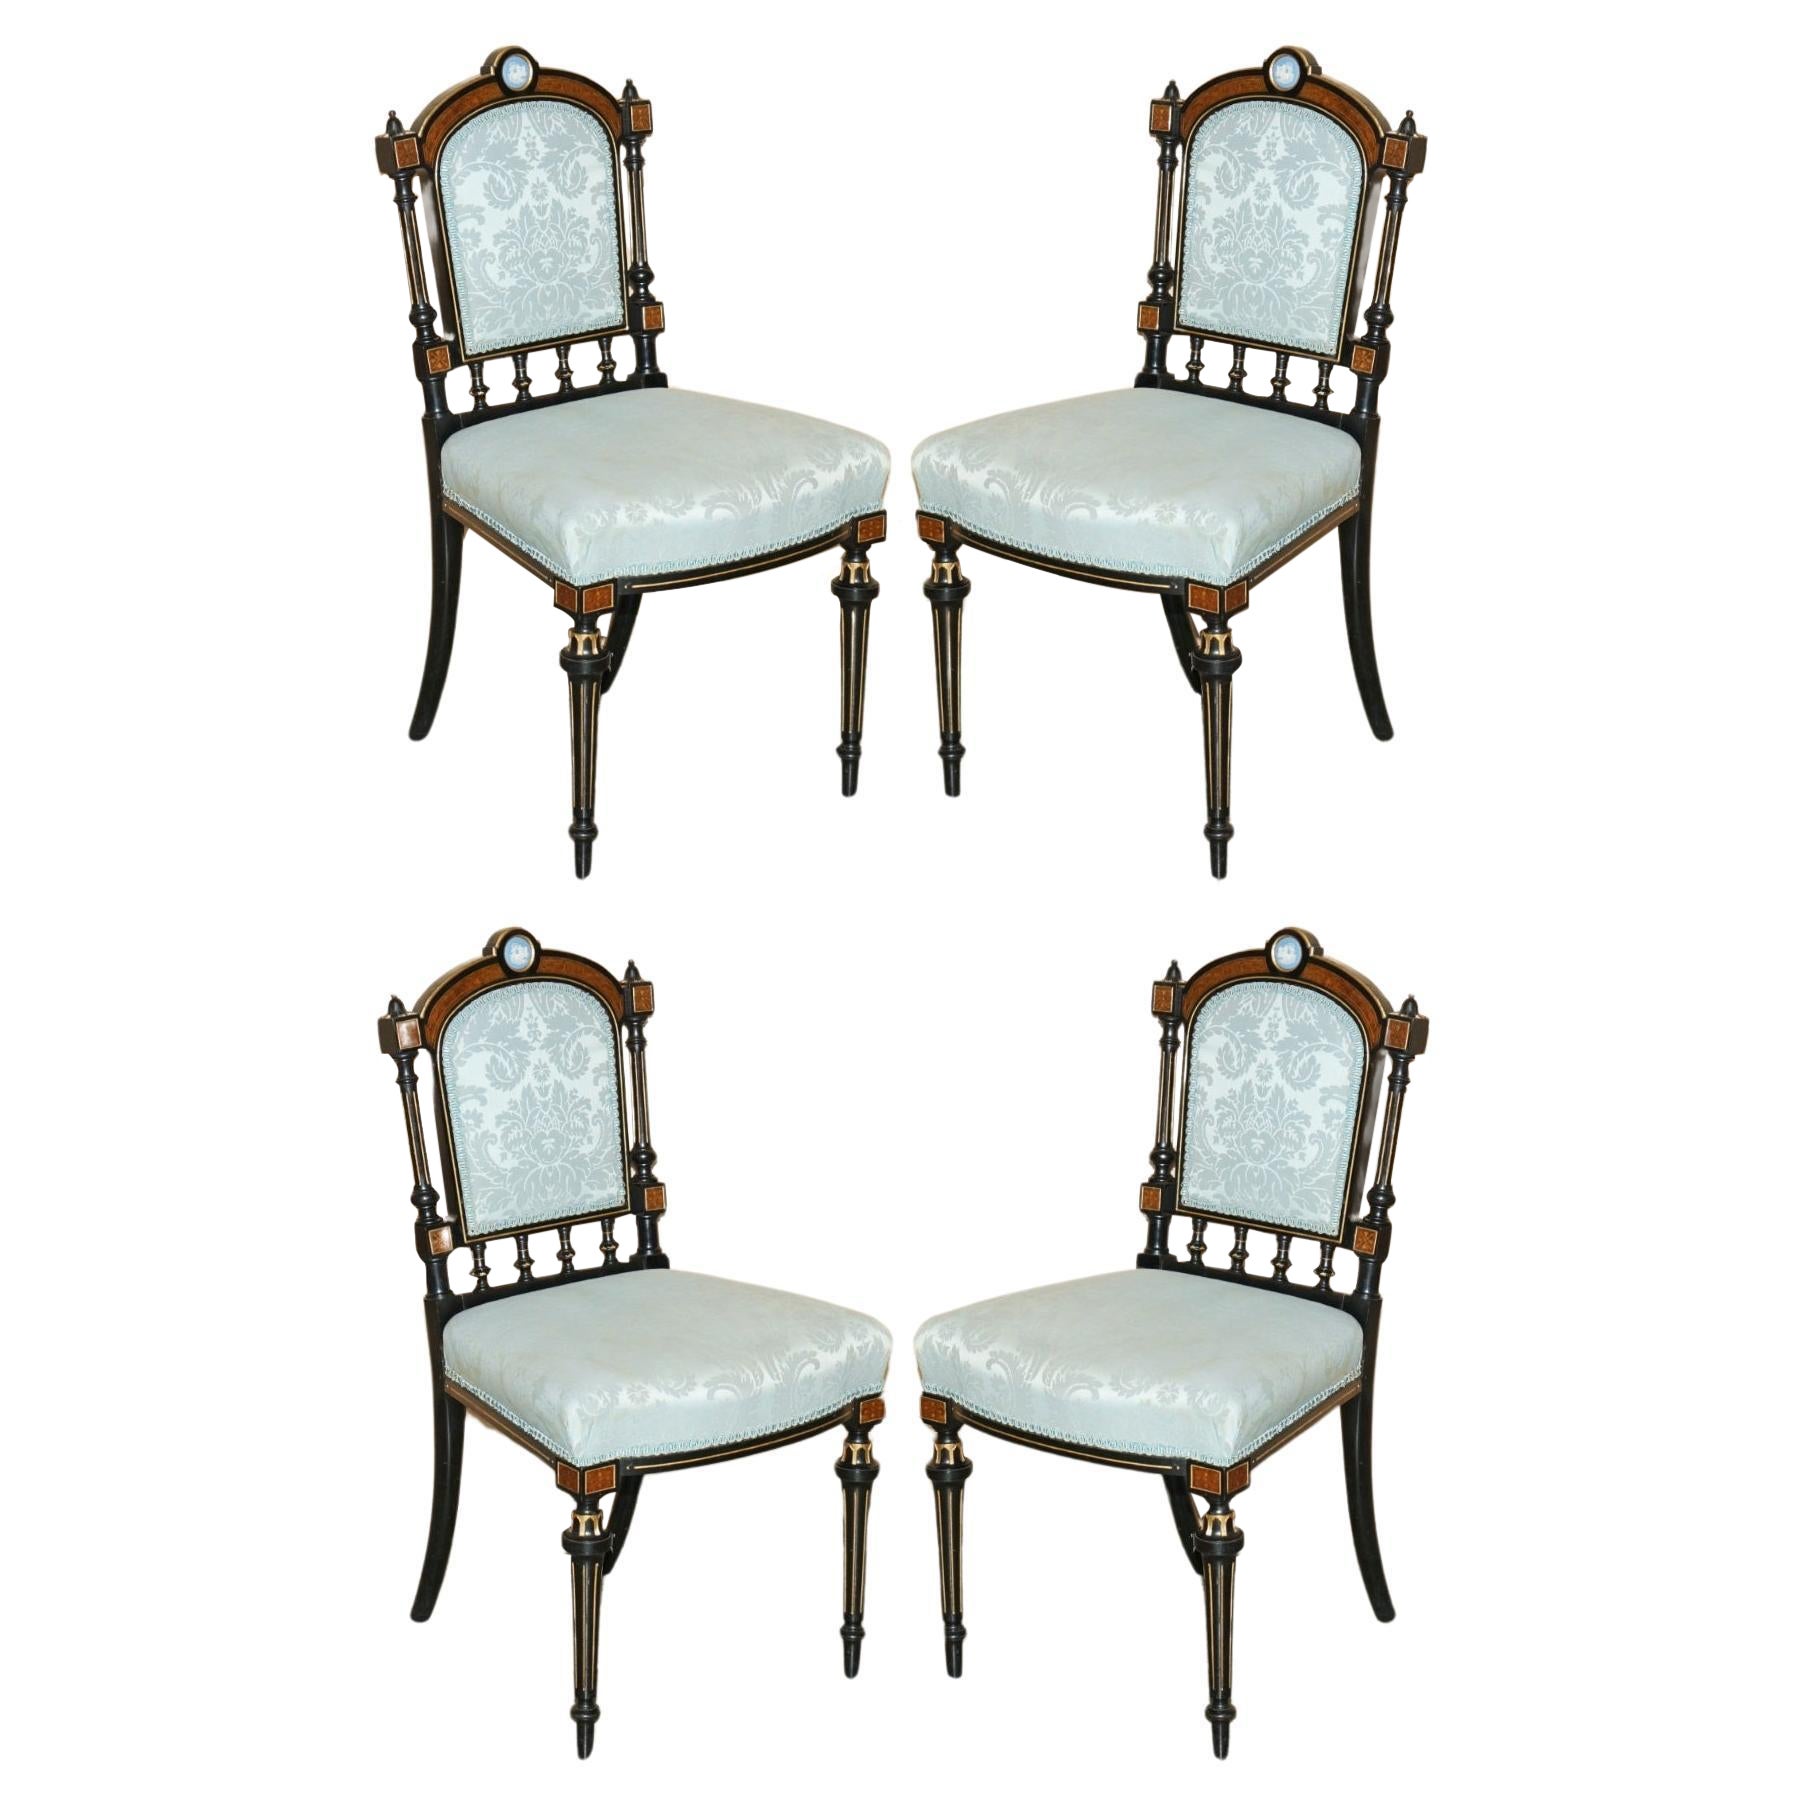 FOUR FINE BURR WALNUT AESTHETIC MOVEMENT DINING CHAIRS WITH GRAND TOUR PLAQUEs